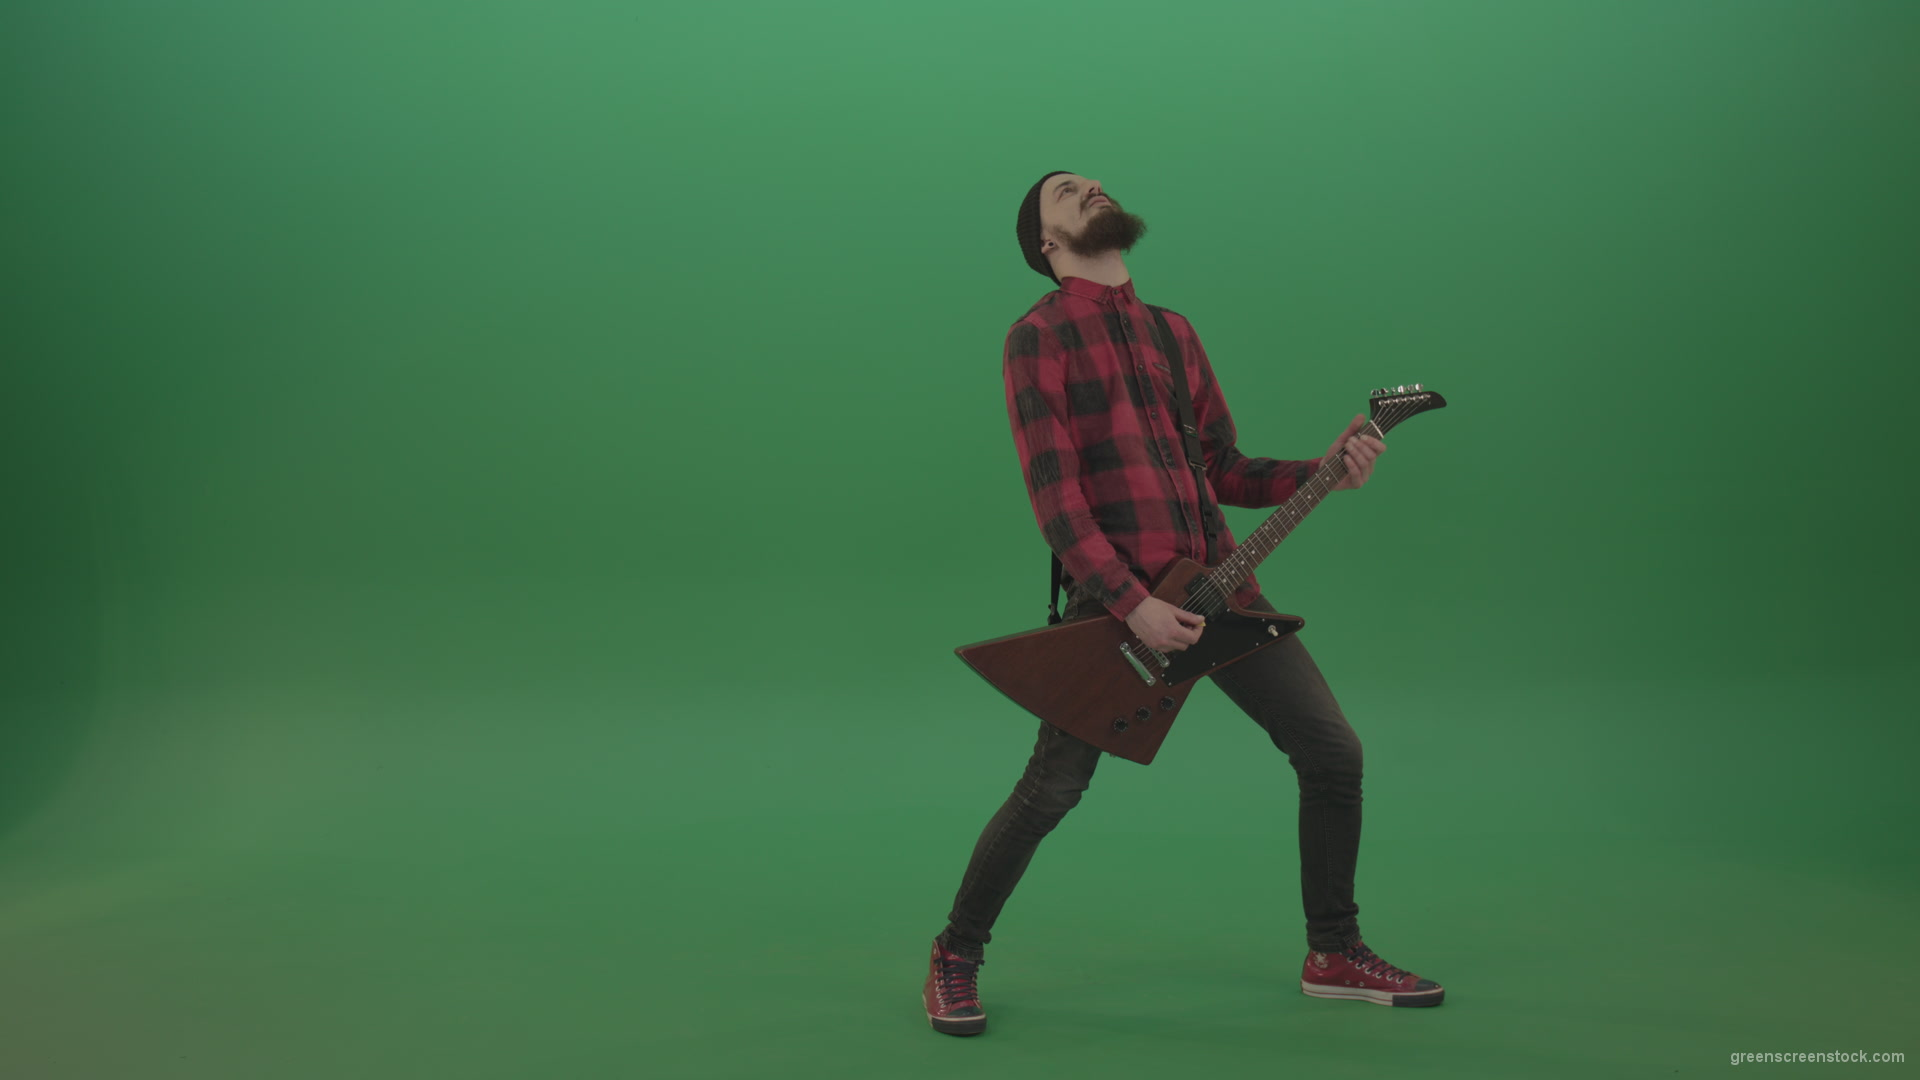 Punk-rock-full-size-man-guitarist-play-guitar-with-emotions-on-green-screen_001 Green Screen Stock